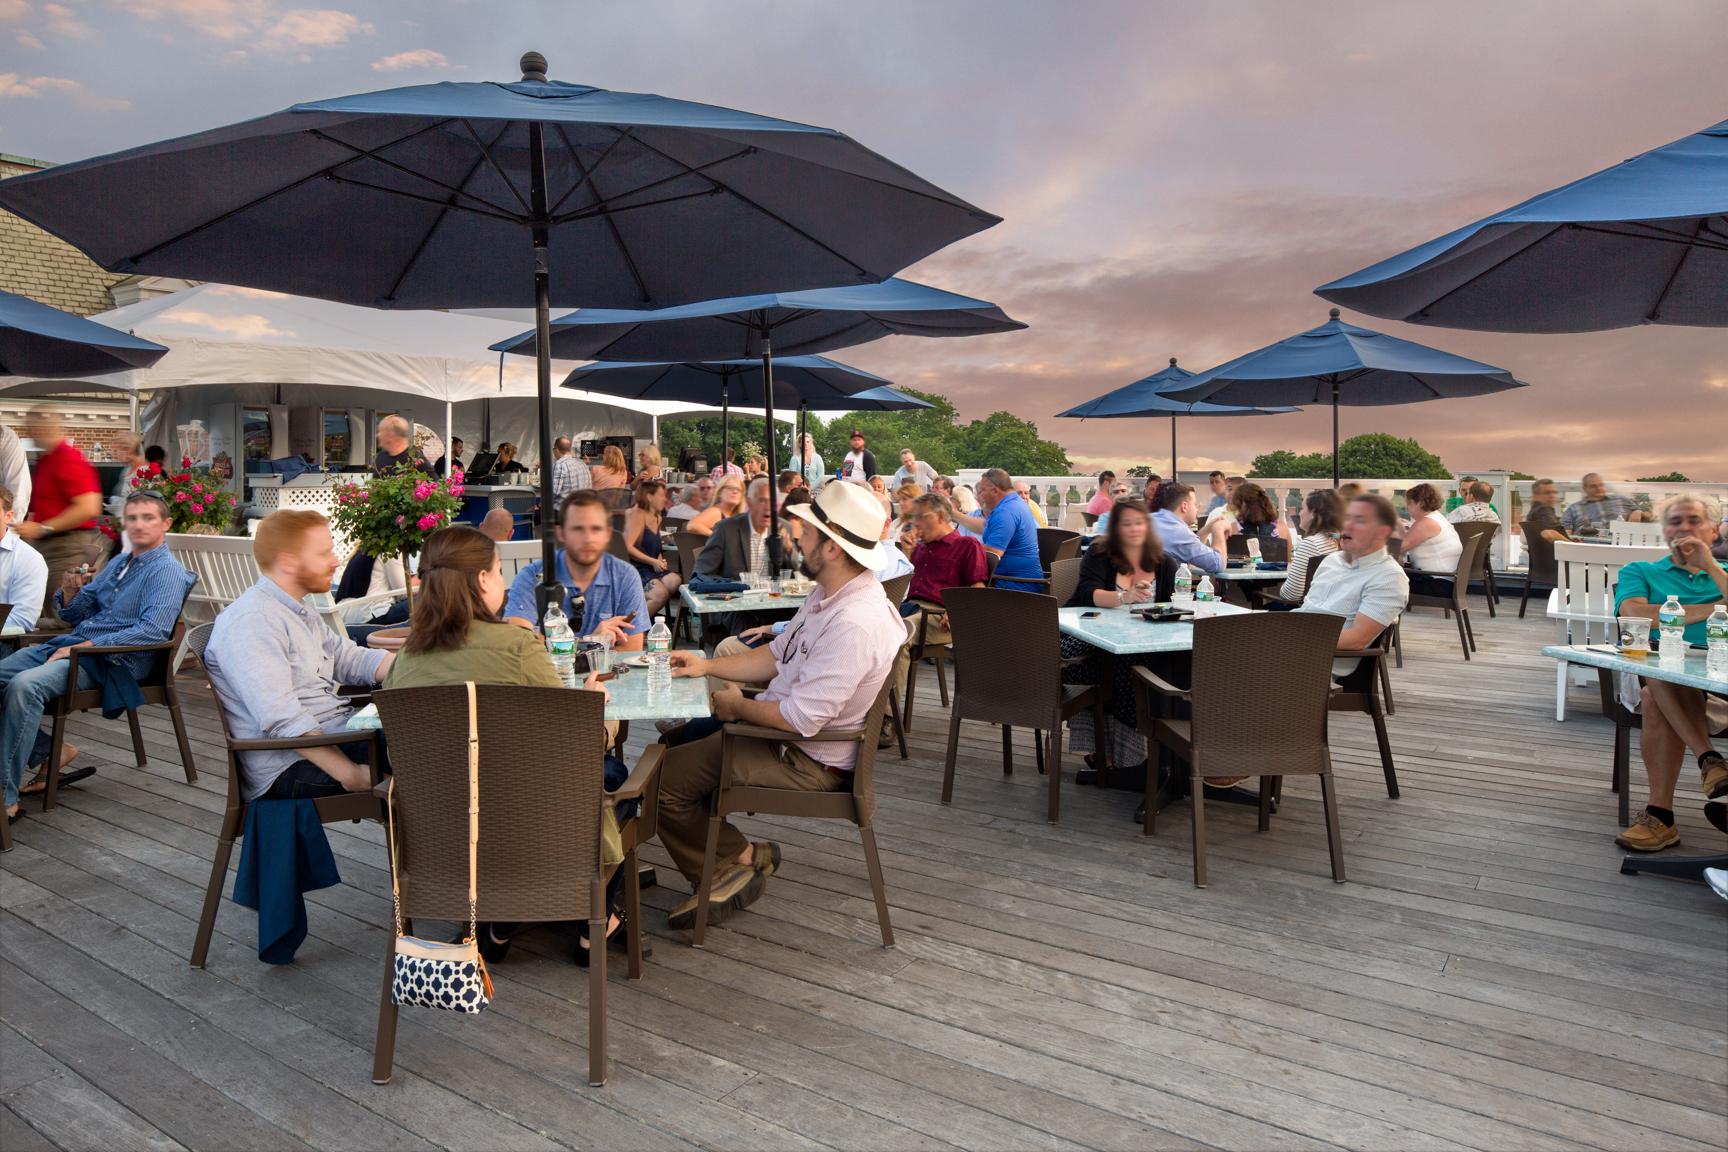 Top of Newport, Hotel Viking's rooftop bar and kitchen, is a popular spot for ice cold beverages and tasty menu items.